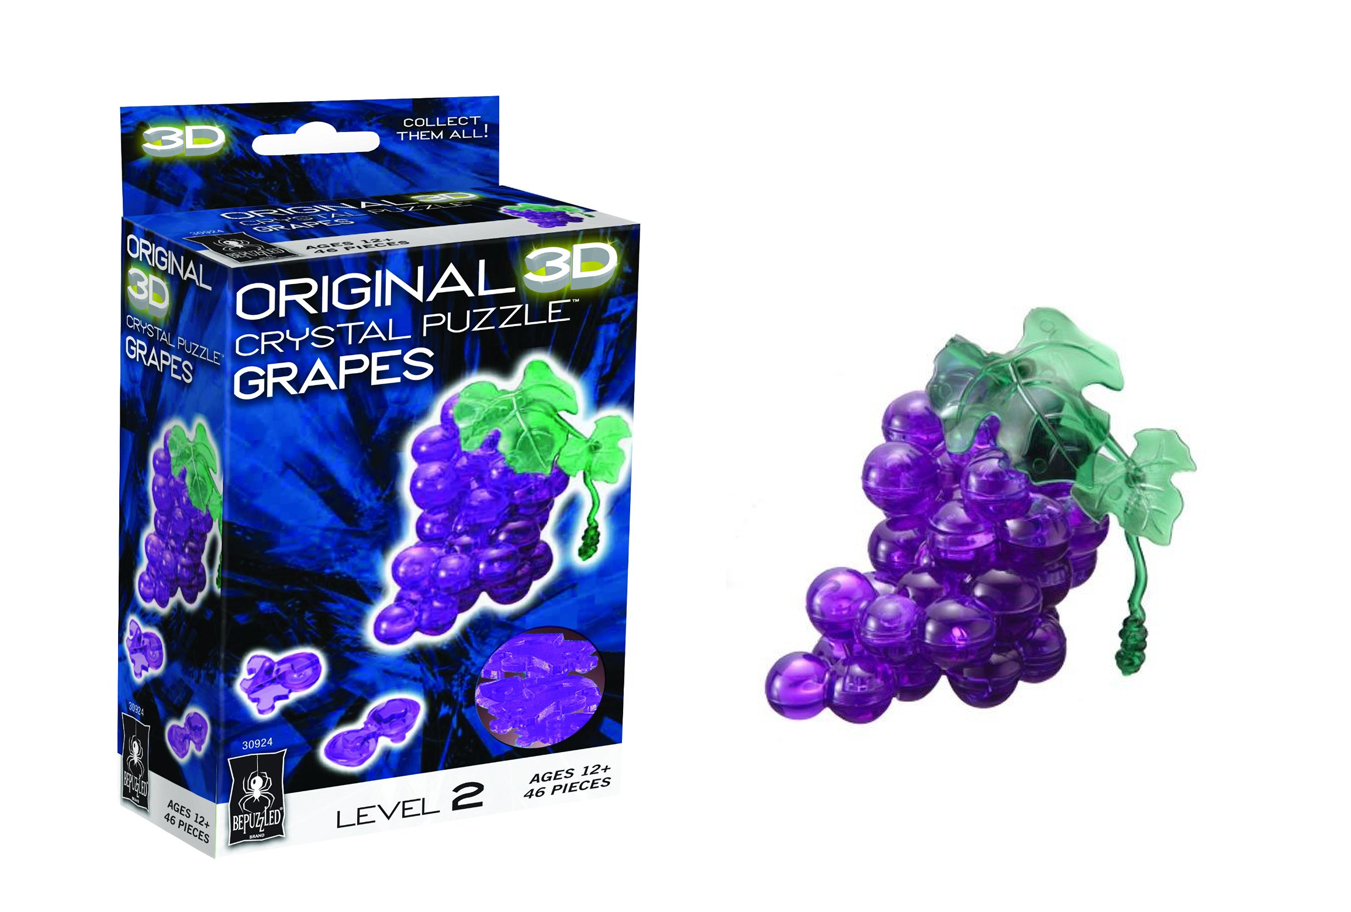 fathers day gift ideas 2016 3D Crystal Puzzle - Grapes